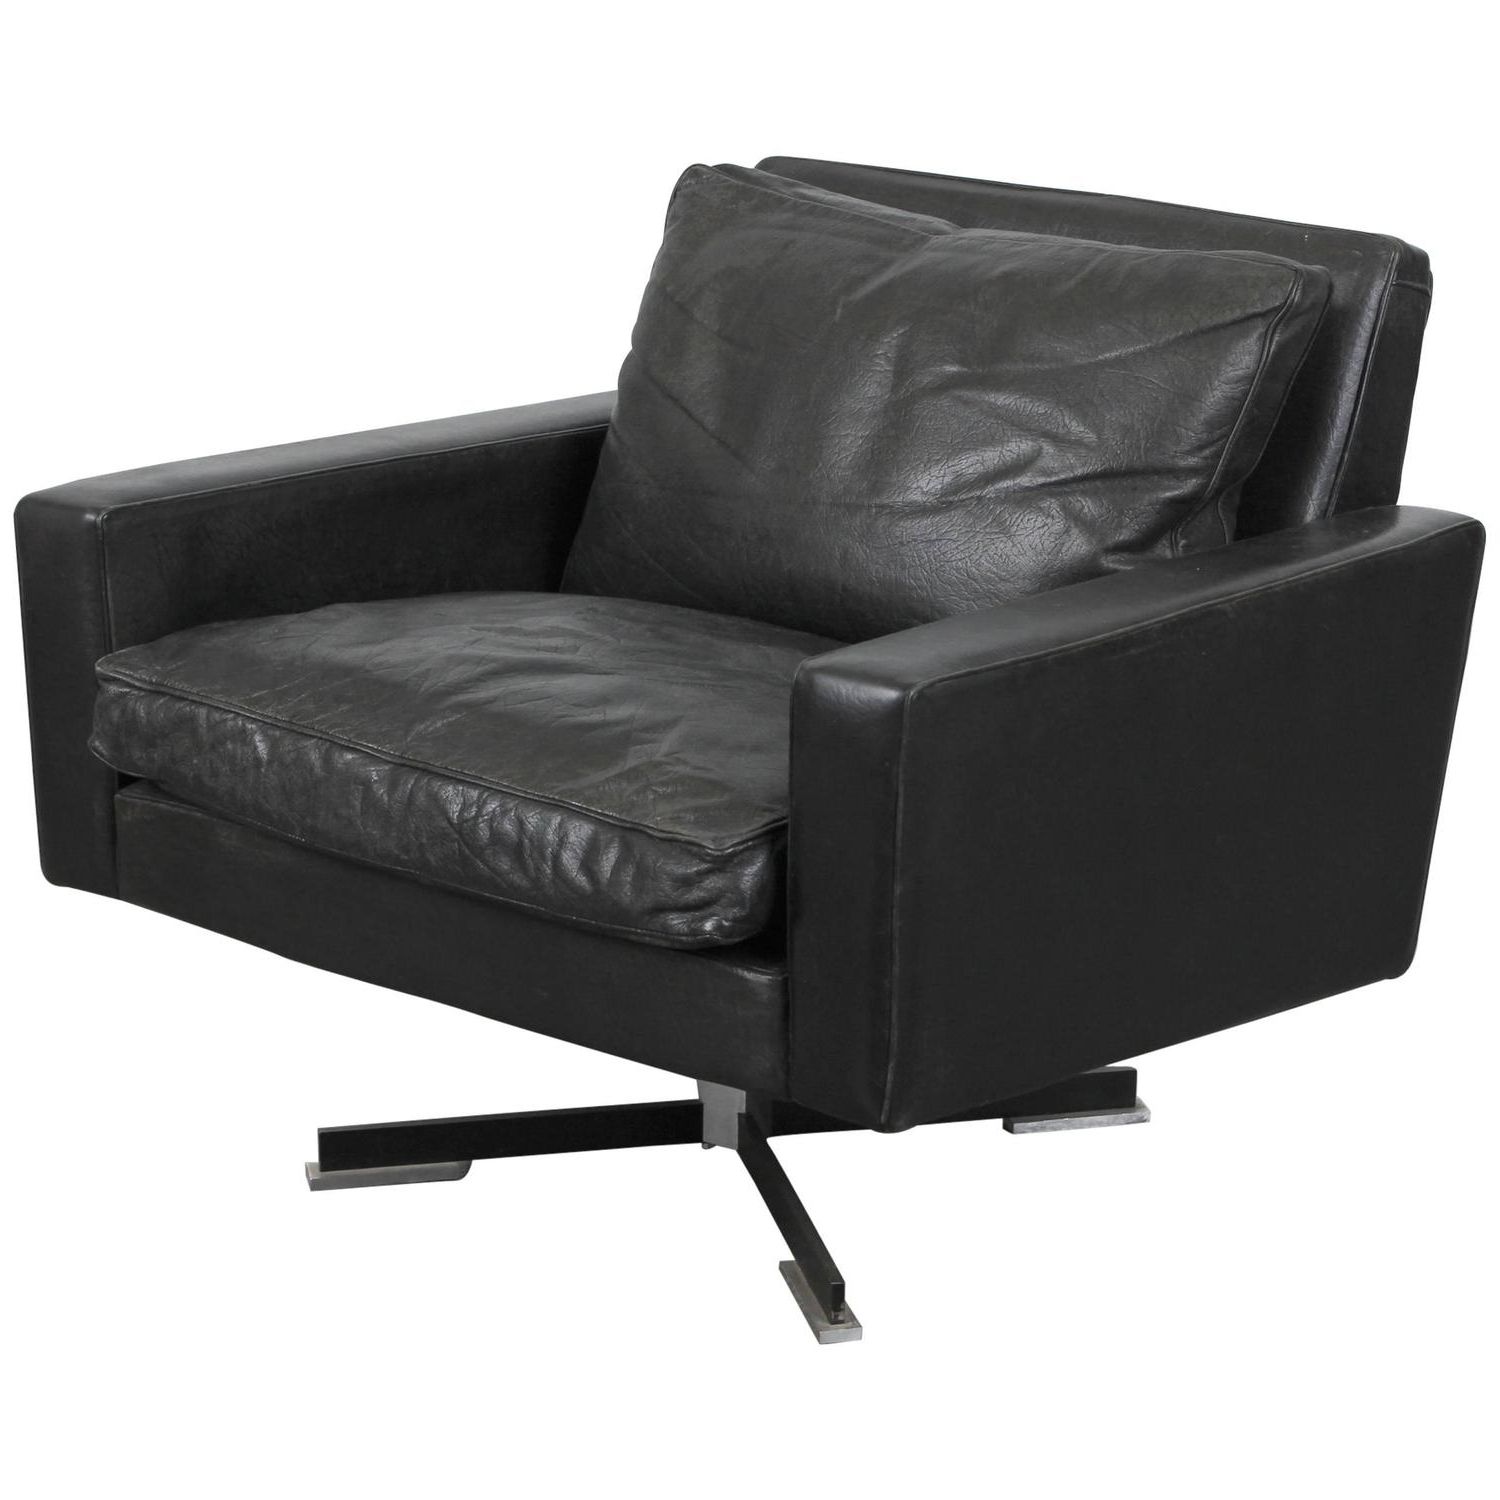 Famous Mid Century Modern Black Leather Swivel Chair At 1stdibs With Leather Black Swivel Chairs (View 3 of 20)